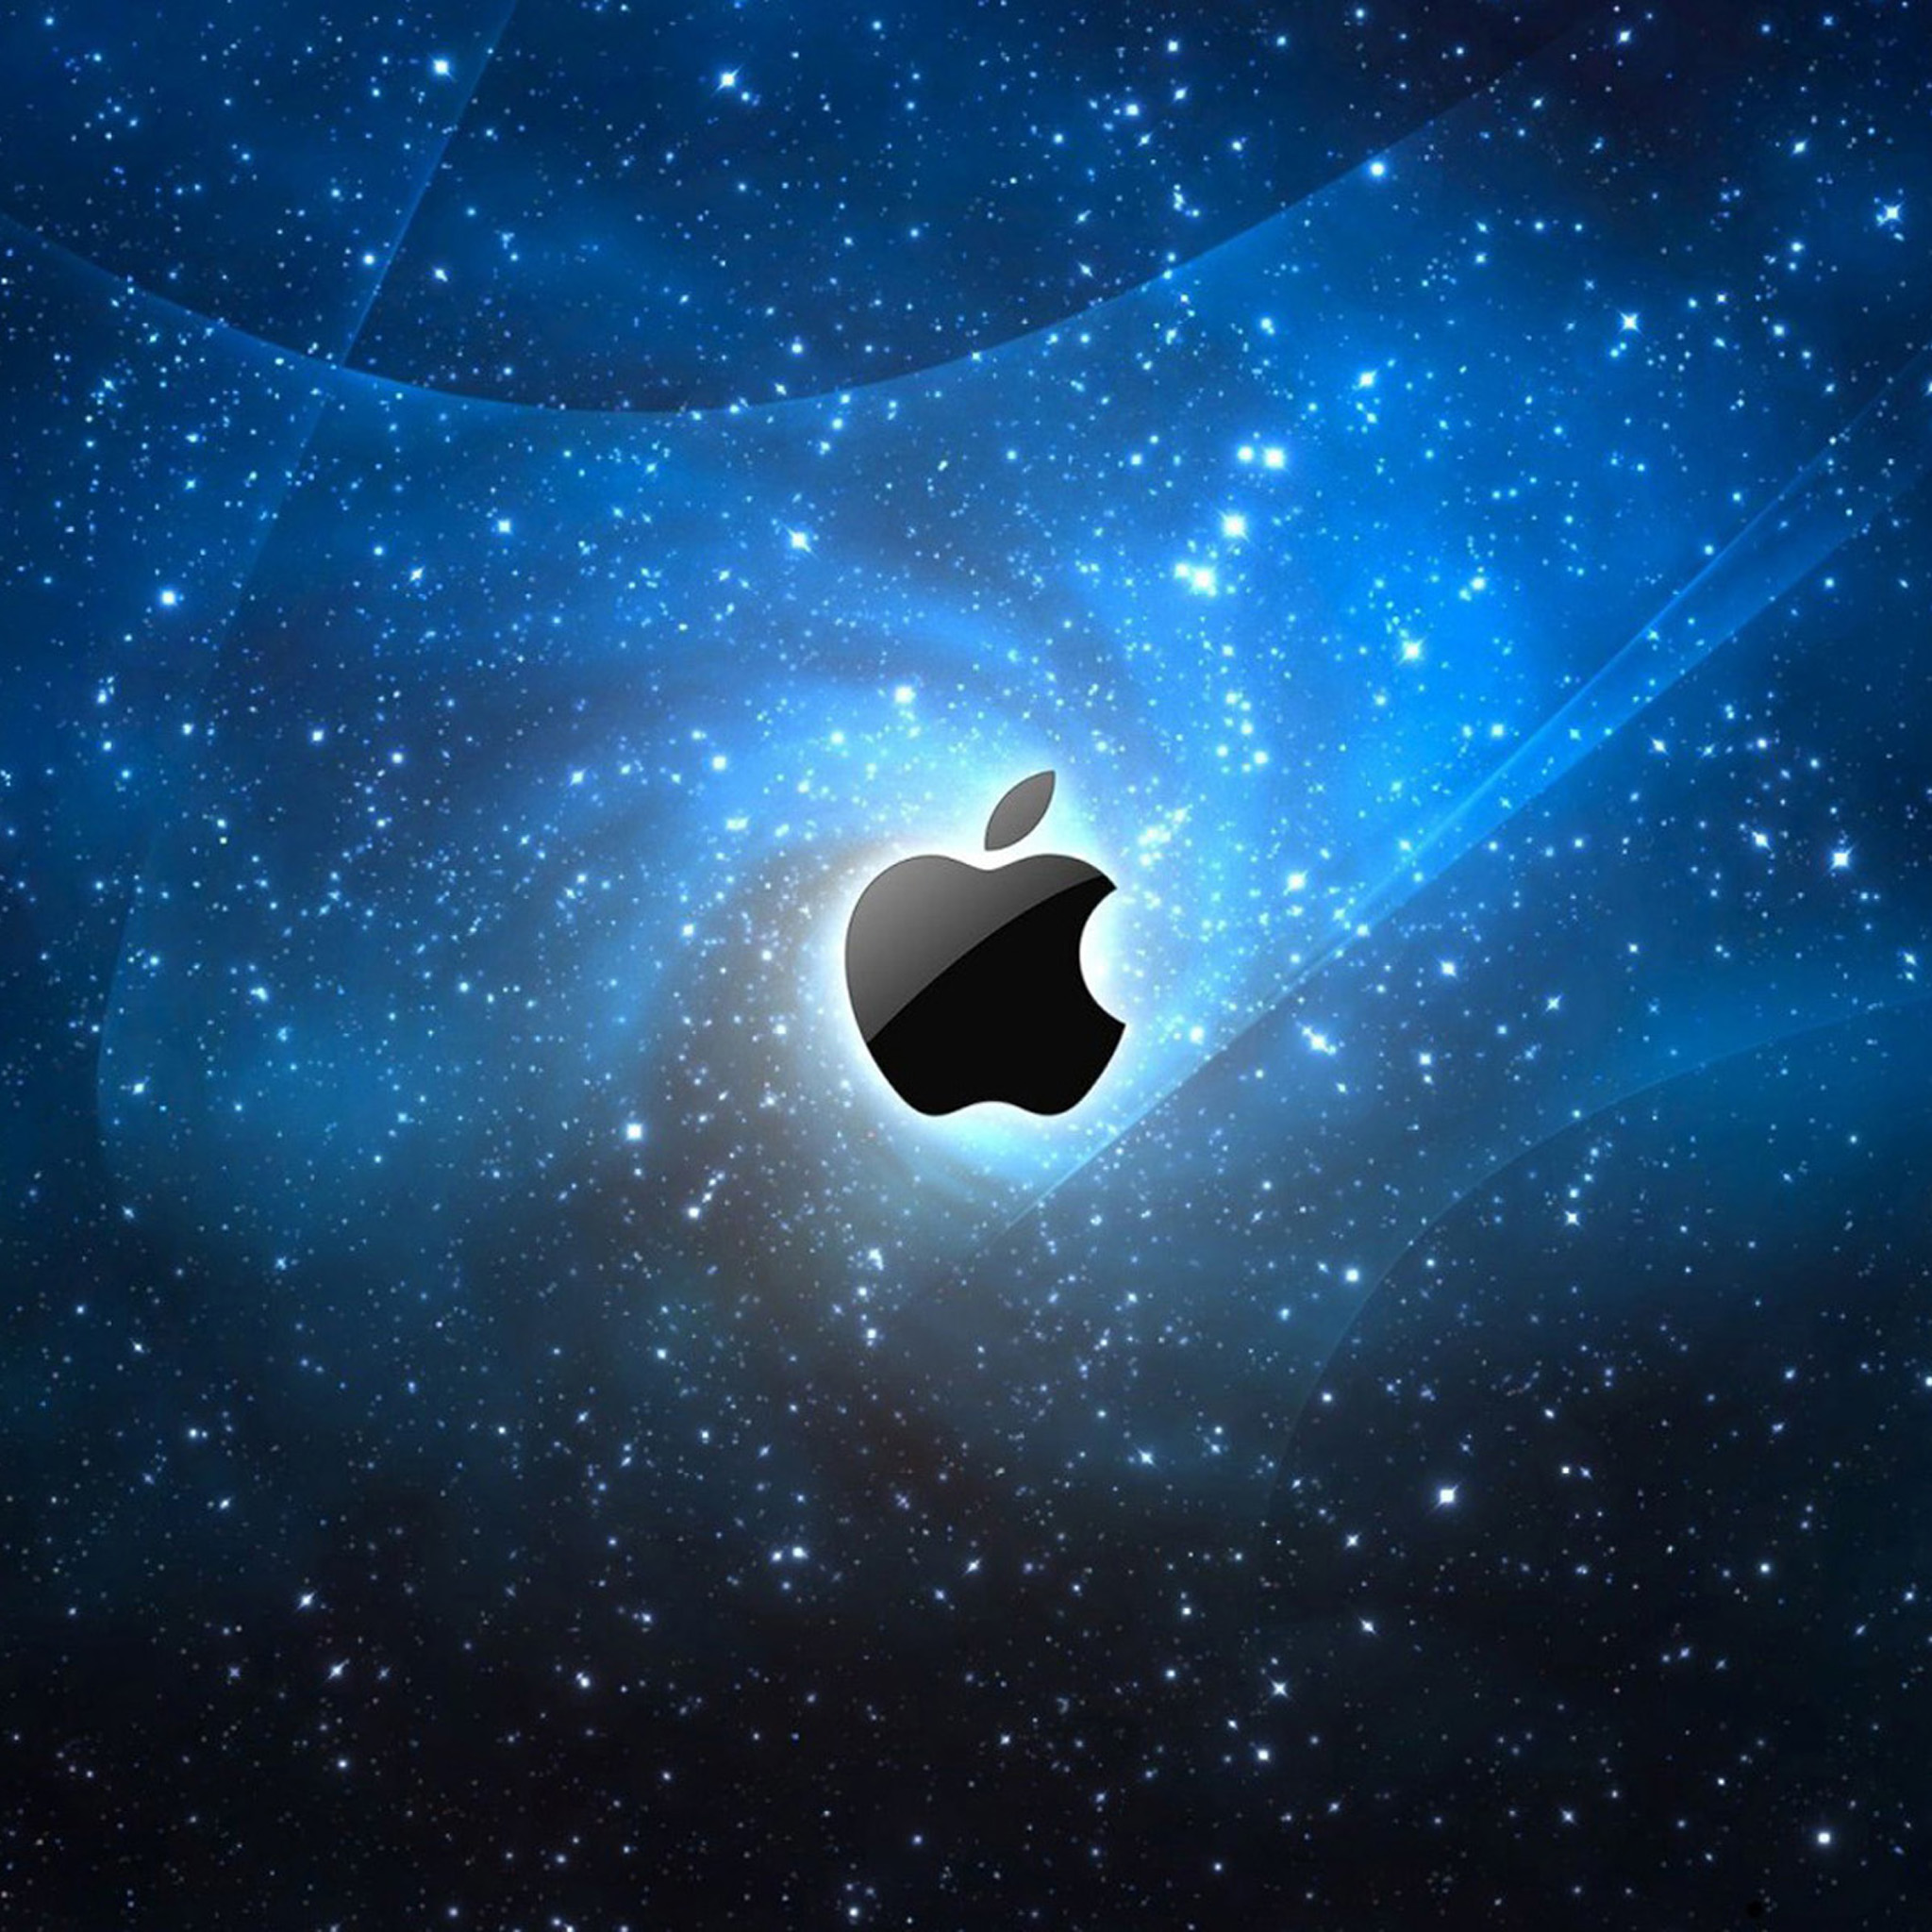 Free download Space Apple iPad Air 2 Wallpapers iPad Air 2 Wallpapers